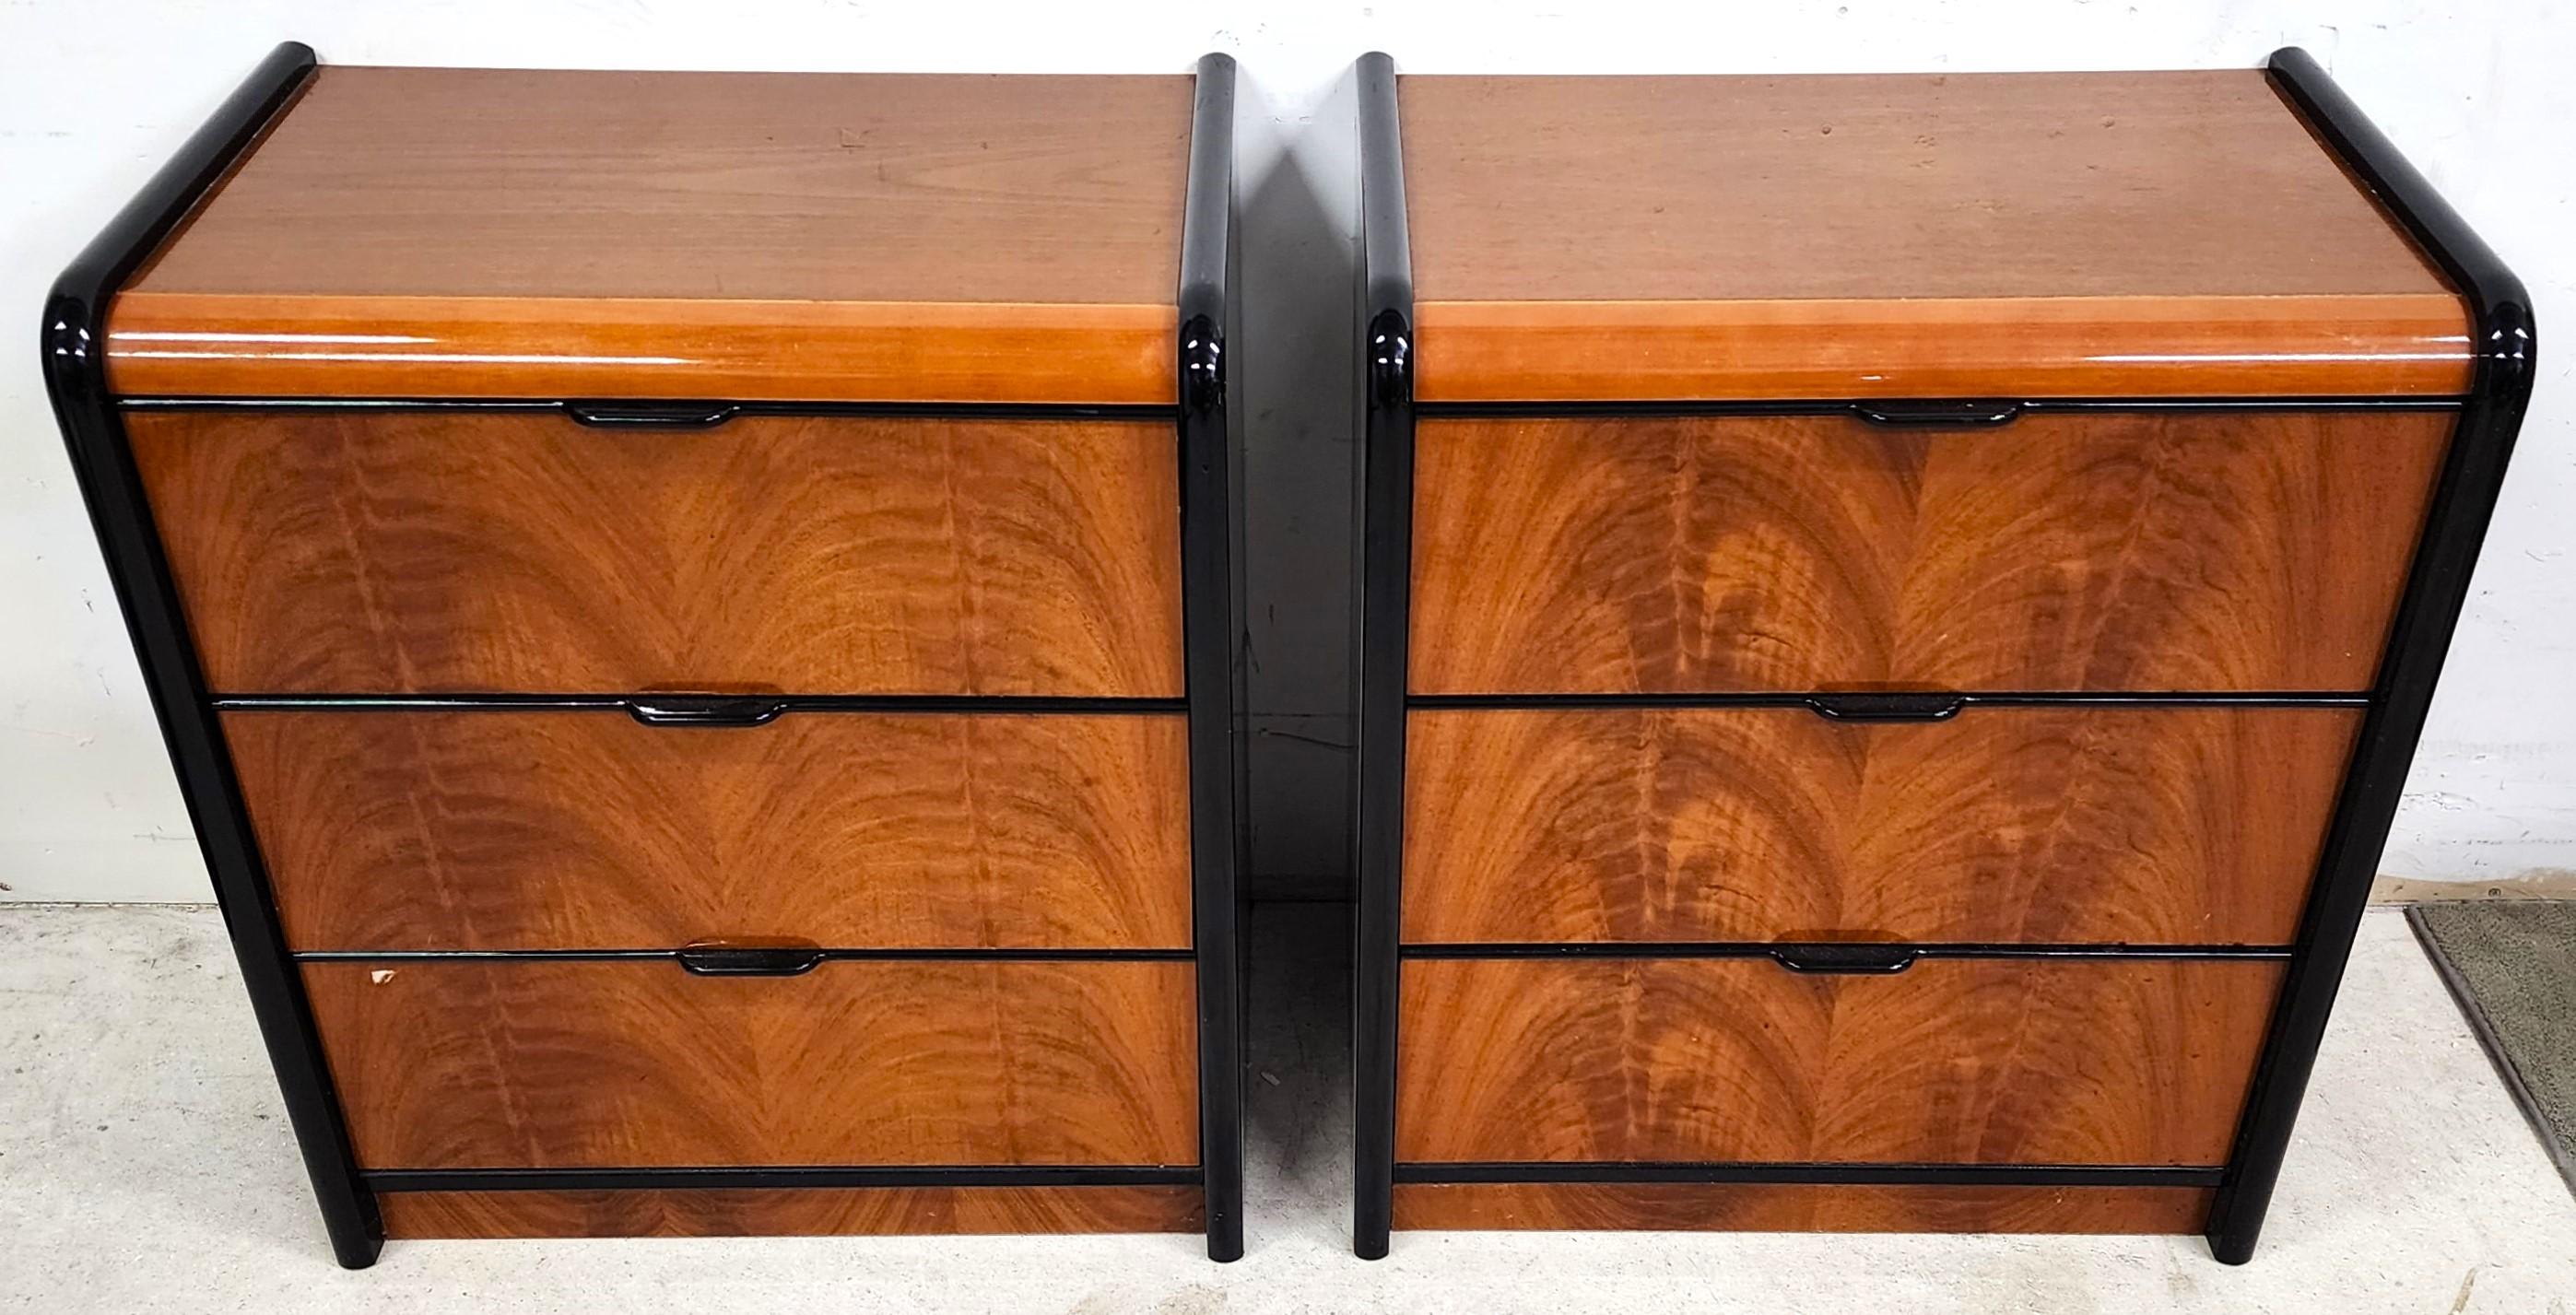 For FULL item description click on CONTINUE READING at the bottom of this page.

Offering One Of Our Recent Palm Beach Estate Fine Furniture Acquisitions Of A
Pair of Donald Deskey Style Italian Nightstands
Featuring a highly polished lacquered